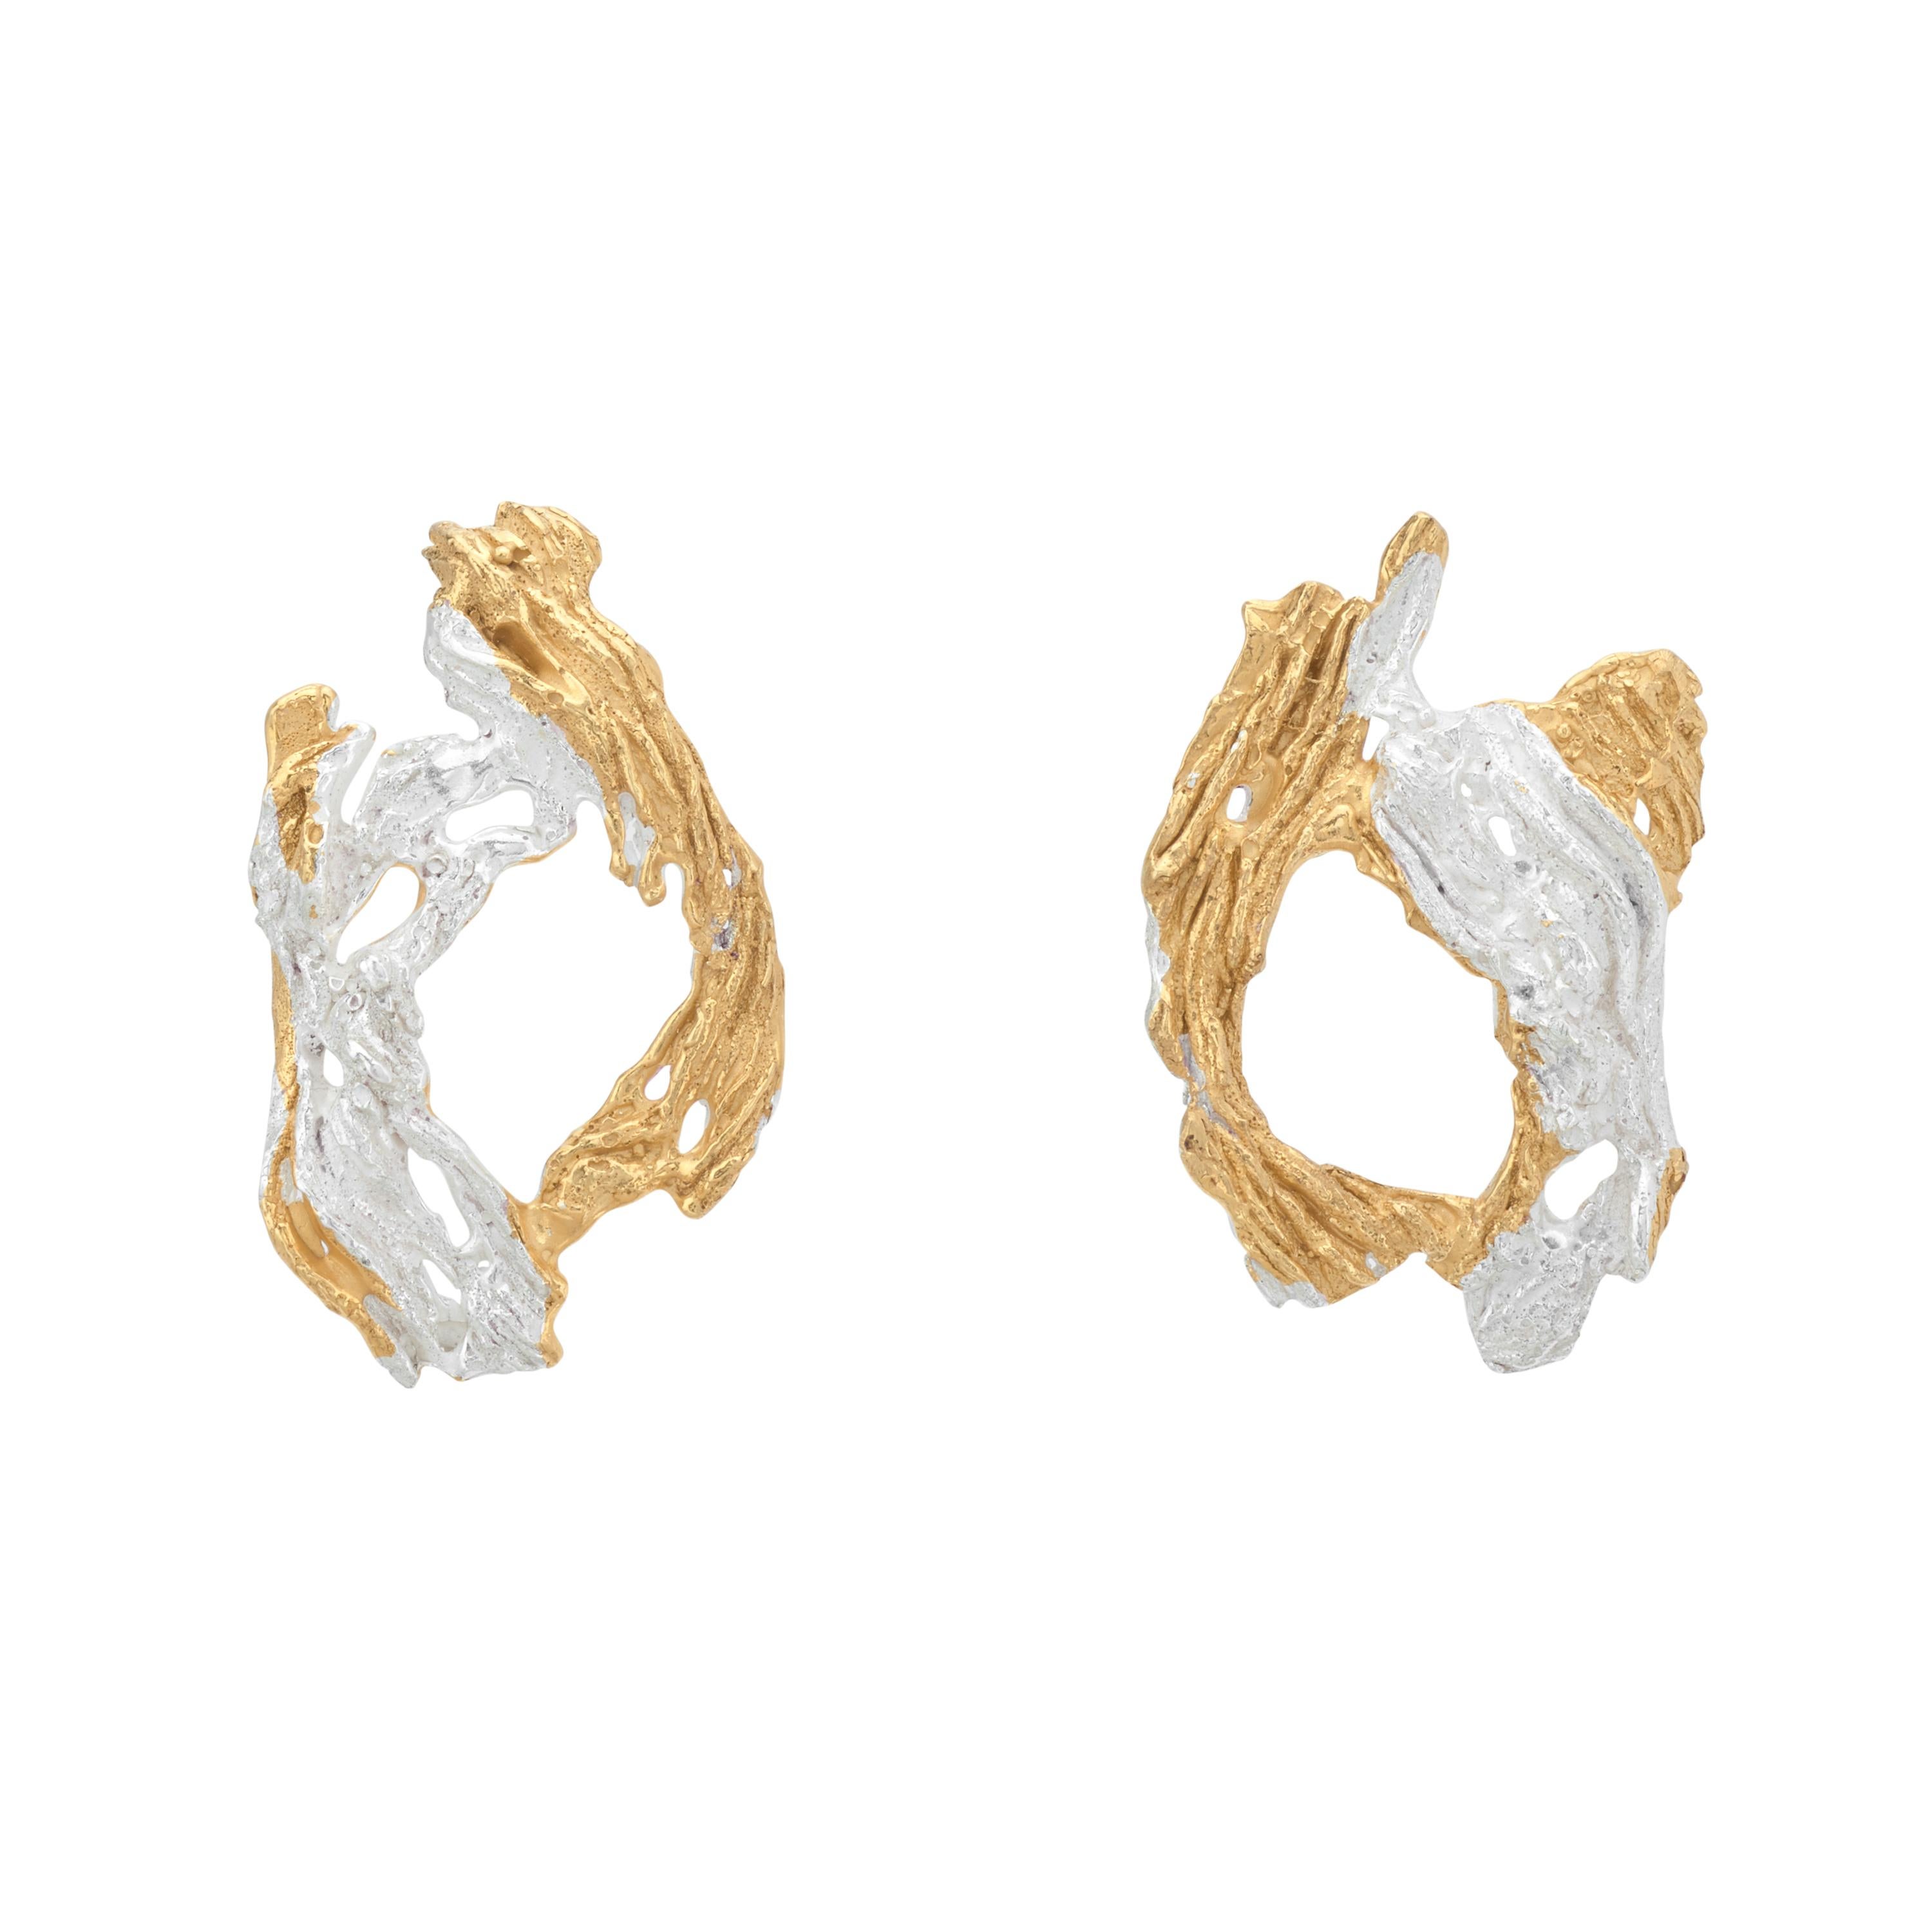 Loveness Lee - Itsaso - Gold and Silver hoop Textured Earrings For Sale